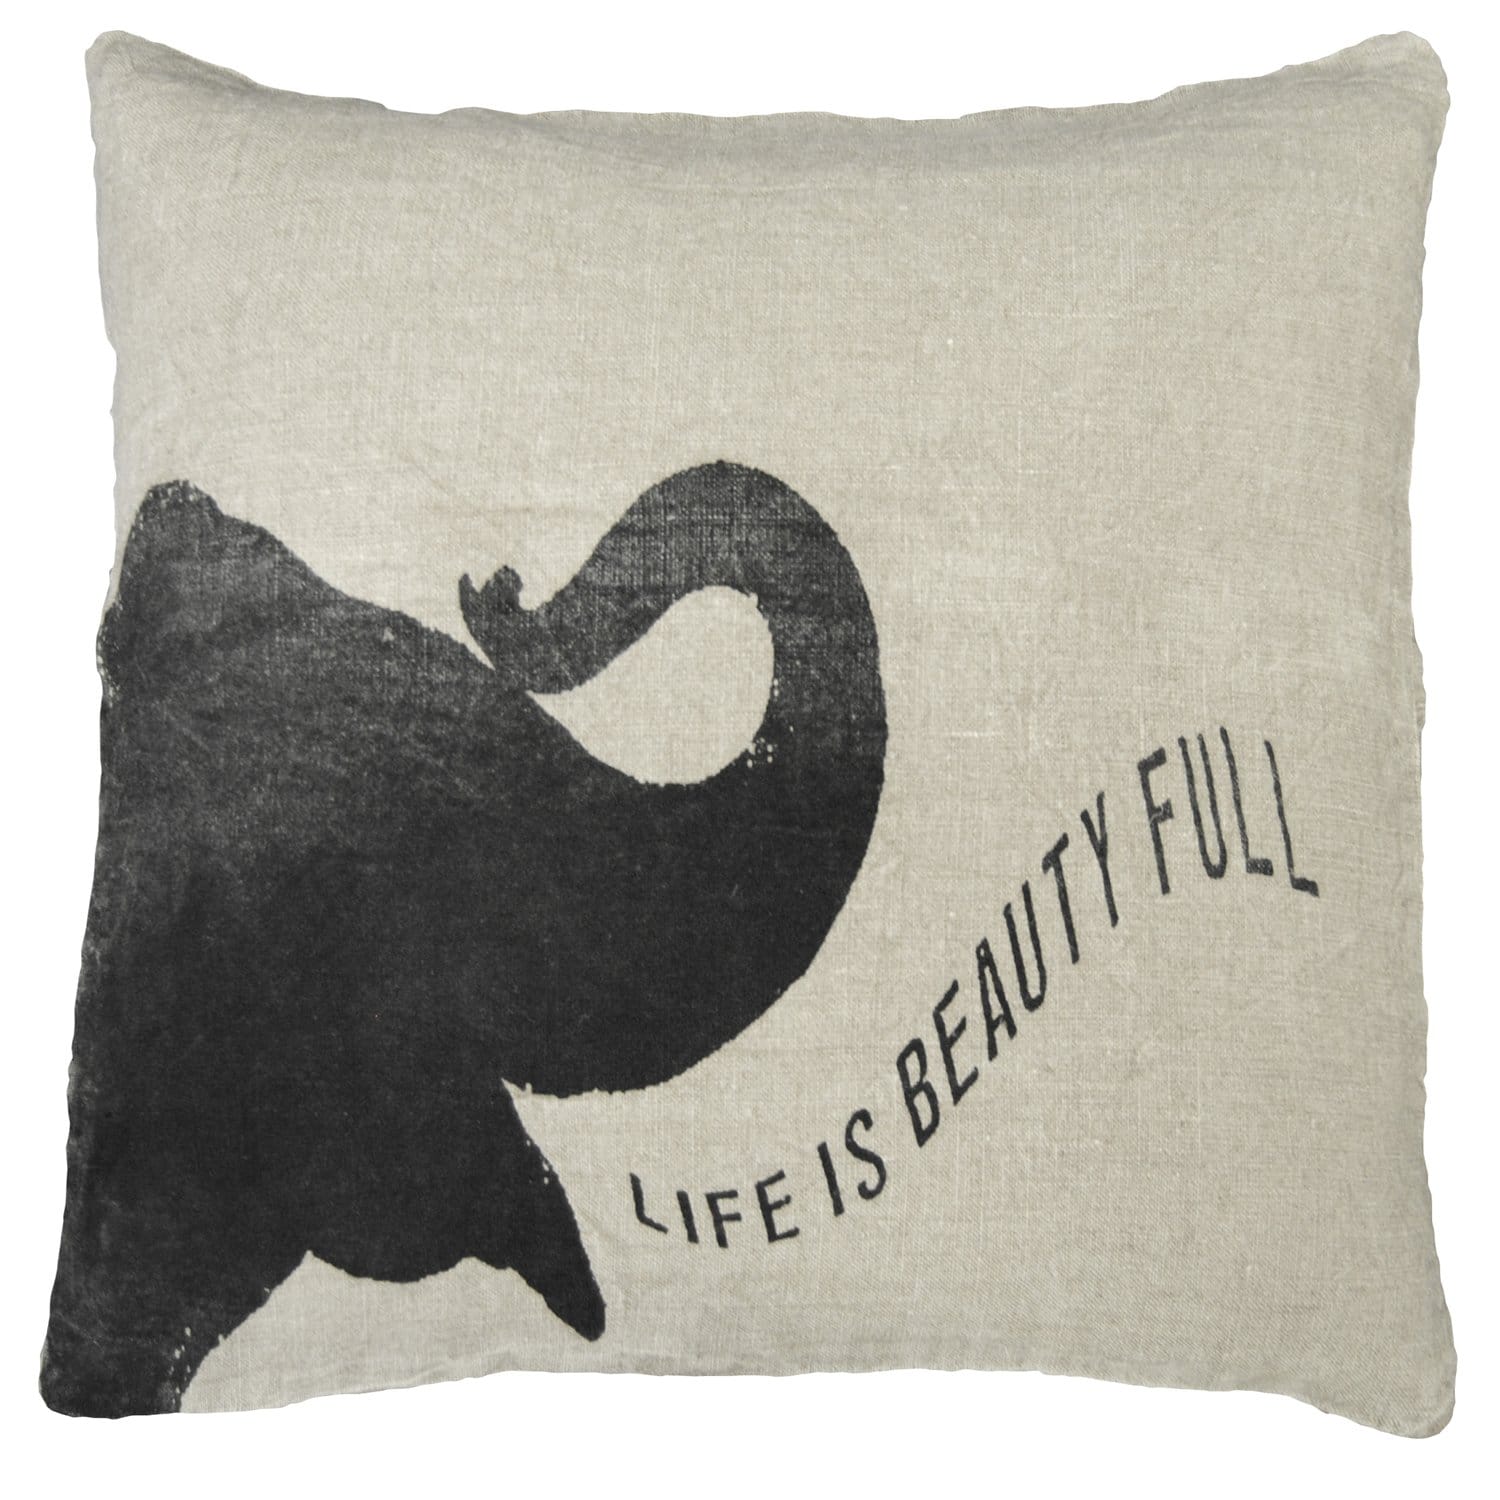 ELEPHANT SPEAKING LIFE IS - PILLOW-Pillow-Jack and Jill Boutique